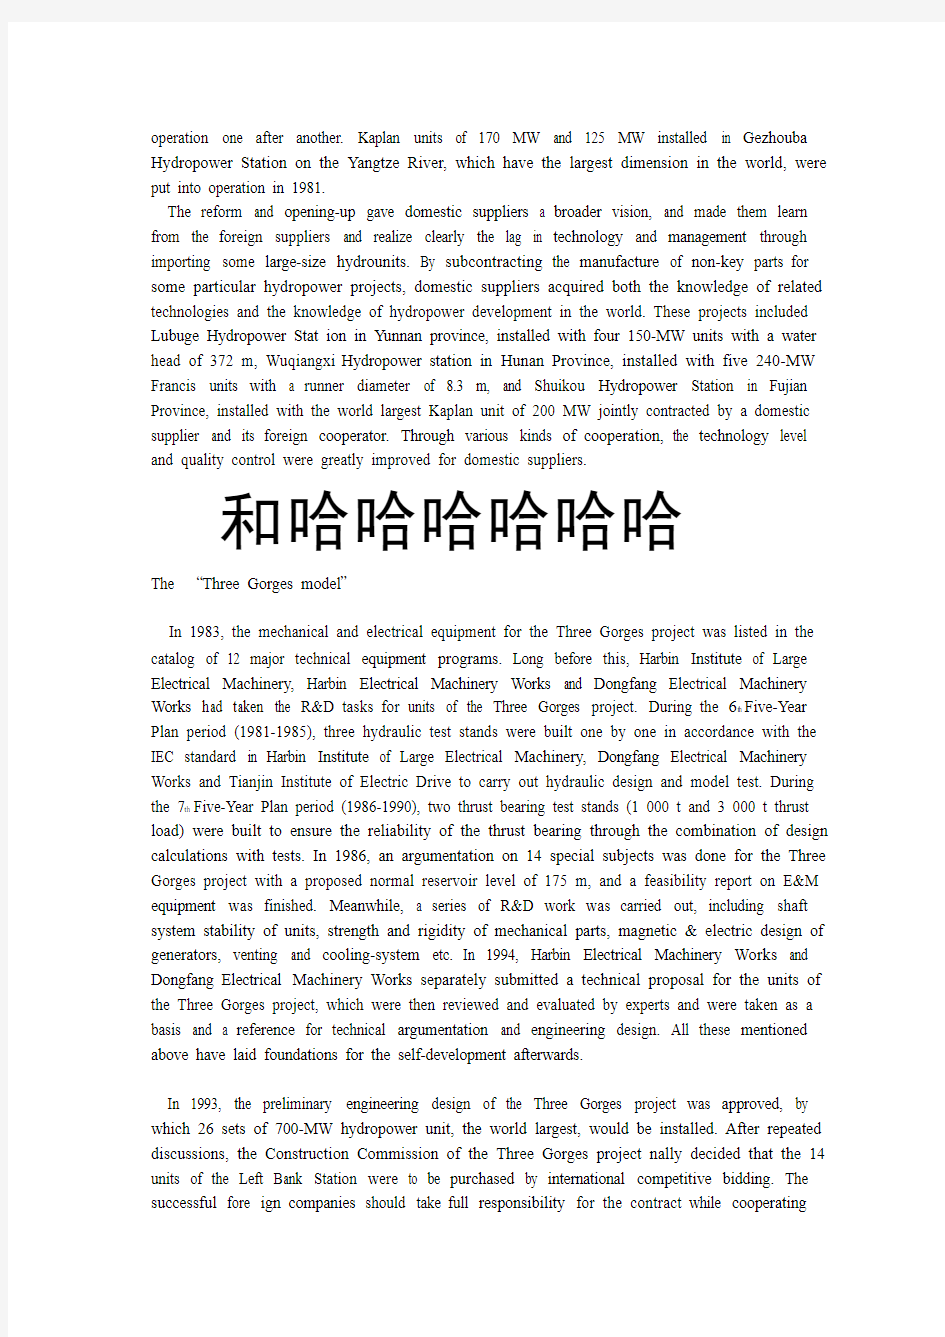 Review of China s Hydropower Manufacturing Industry